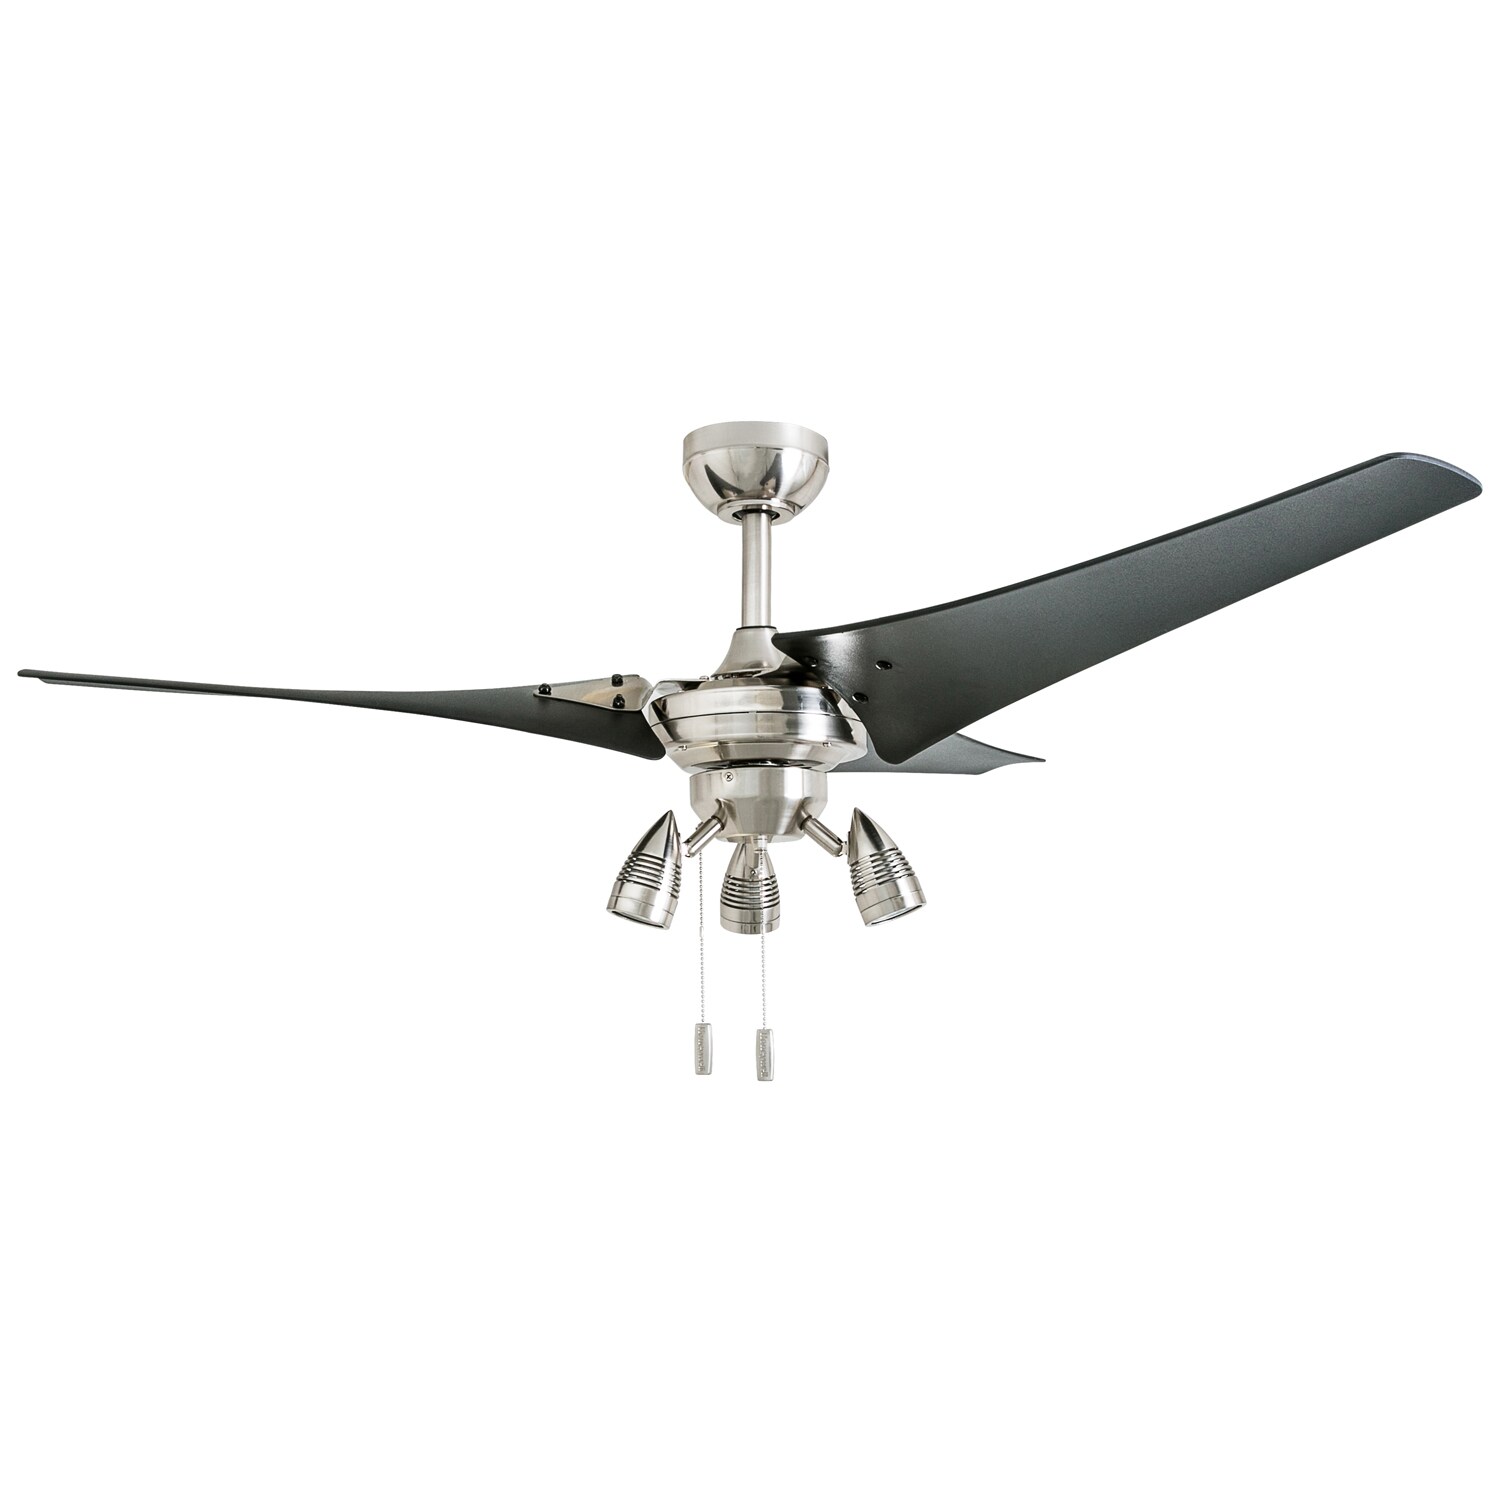 3 Black ABS Blades Honeywell Ceiling Fans 50611-01 High Power Ceiling Fan LED 56 Industrial Brushed Nickel 